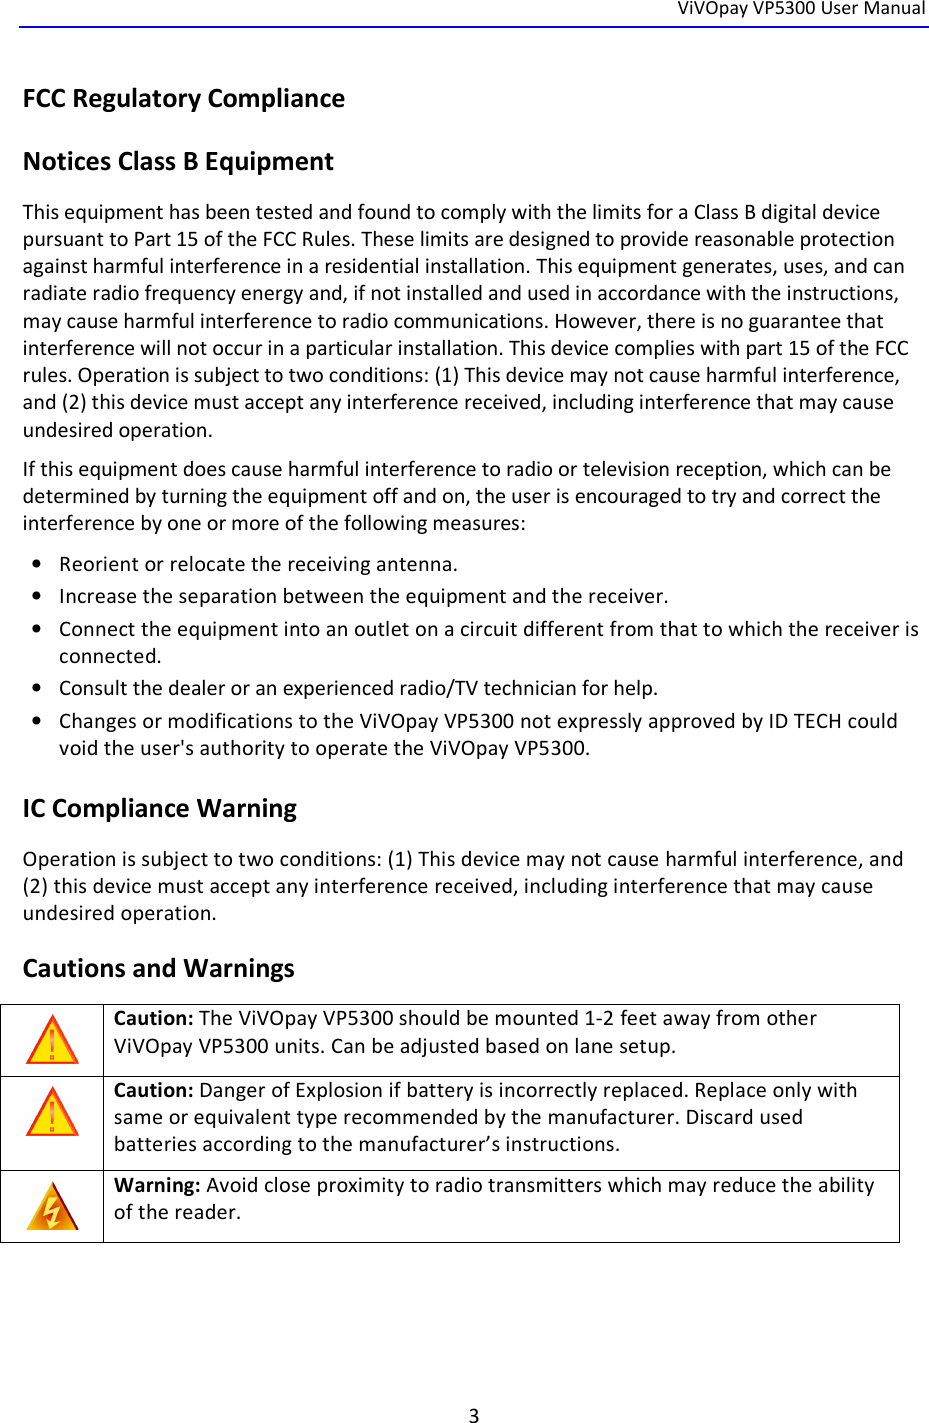  ViVOpay VP5300 User Manual   3  FCC Regulatory Compliance Notices Class B Equipment This equipment has been tested and found to comply with the limits for a Class B digital device pursuant to Part 15 of the FCC Rules. These limits are designed to provide reasonable protection against harmful interference in a residential installation. This equipment generates, uses, and can radiate radio frequency energy and, if not installed and used in accordance with the instructions, may cause harmful interference to radio communications. However, there is no guarantee that interference will not occur in a particular installation. This device complies with part 15 of the FCC rules. Operation is subject to two conditions: (1) This device may not cause harmful interference, and (2) this device must accept any interference received, including interference that may cause undesired operation. If this equipment does cause harmful interference to radio or television reception, which can be determined by turning the equipment off and on, the user is encouraged to try and correct the interference by one or more of the following measures: • Reorient or relocate the receiving antenna.  • Increase the separation between the equipment and the receiver. • Connect the equipment into an outlet on a circuit different from that to which the receiver is connected.  • Consult the dealer or an experienced radio/TV technician for help.  • Changes or modifications to the ViVOpay VP5300 not expressly approved by ID TECH could void the user&apos;s authority to operate the ViVOpay VP5300. IC Compliance Warning Operation is subject to two conditions: (1) This device may not cause harmful interference, and (2) this device must accept any interference received, including interference that may cause undesired operation. Cautions and Warnings  Caution: The ViVOpay VP5300 should be mounted 1-2 feet away from other ViVOpay VP5300 units. Can be adjusted based on lane setup.  Caution: Danger of Explosion if battery is incorrectly replaced. Replace only with same or equivalent type recommended by the manufacturer. Discard used batteries according to the manufacturer’s instructions.  Warning: Avoid close proximity to radio transmitters which may reduce the ability of the reader. 